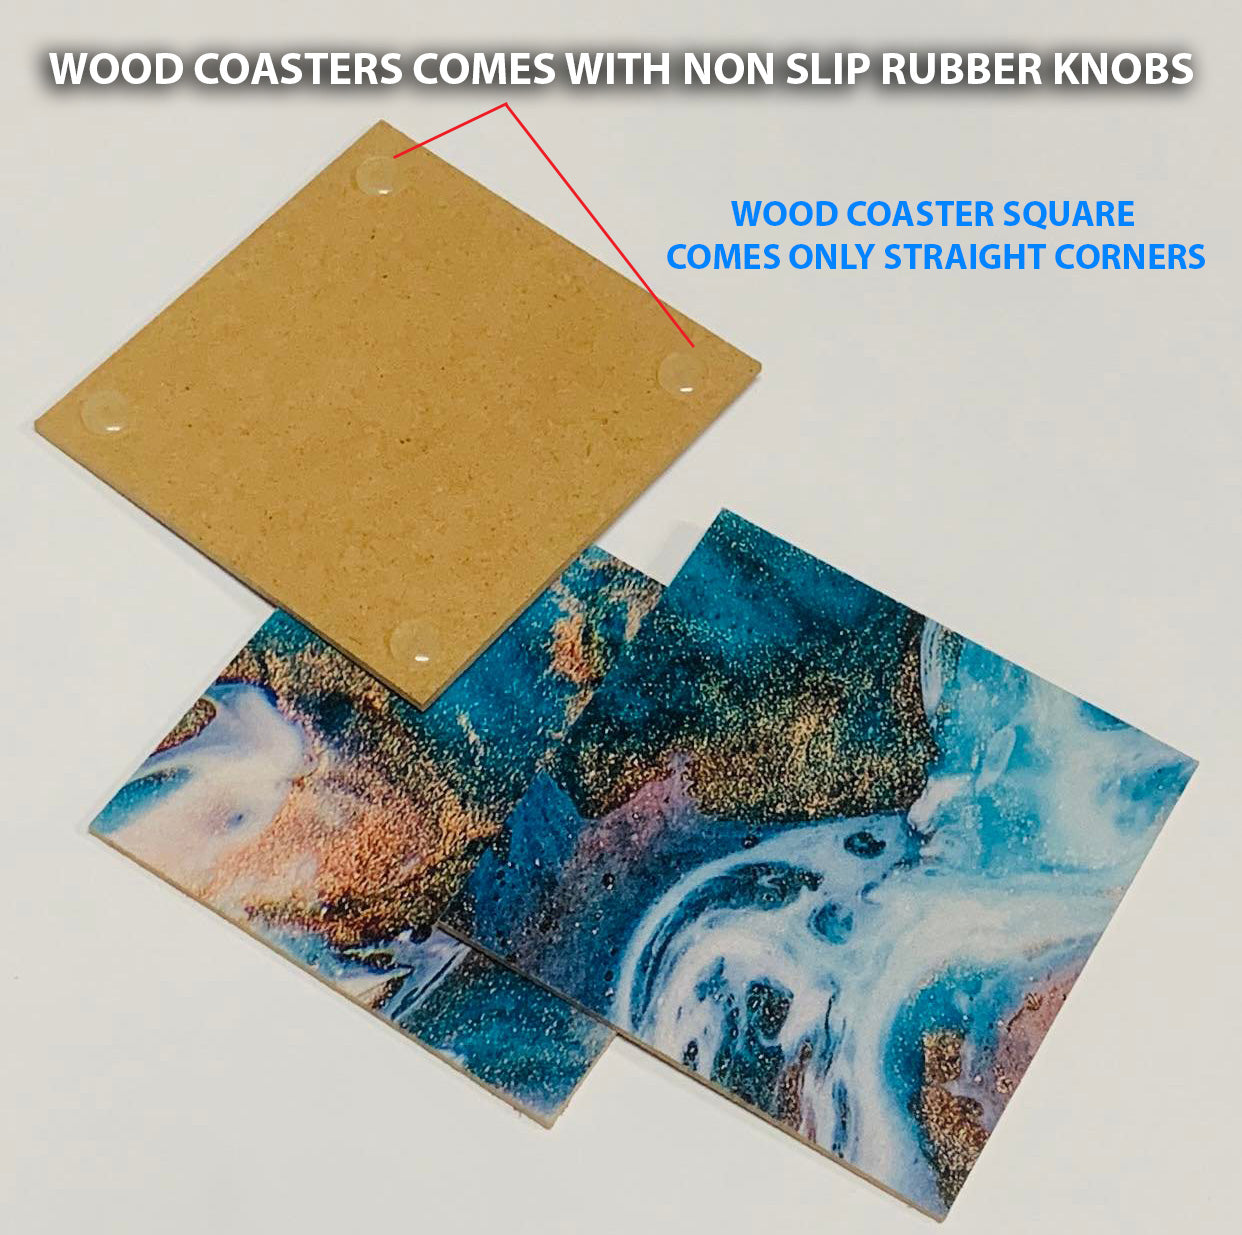 Clear Water & Sky Reflection on Lake Coasters Wood & Rubber - Set of 6 Coasters